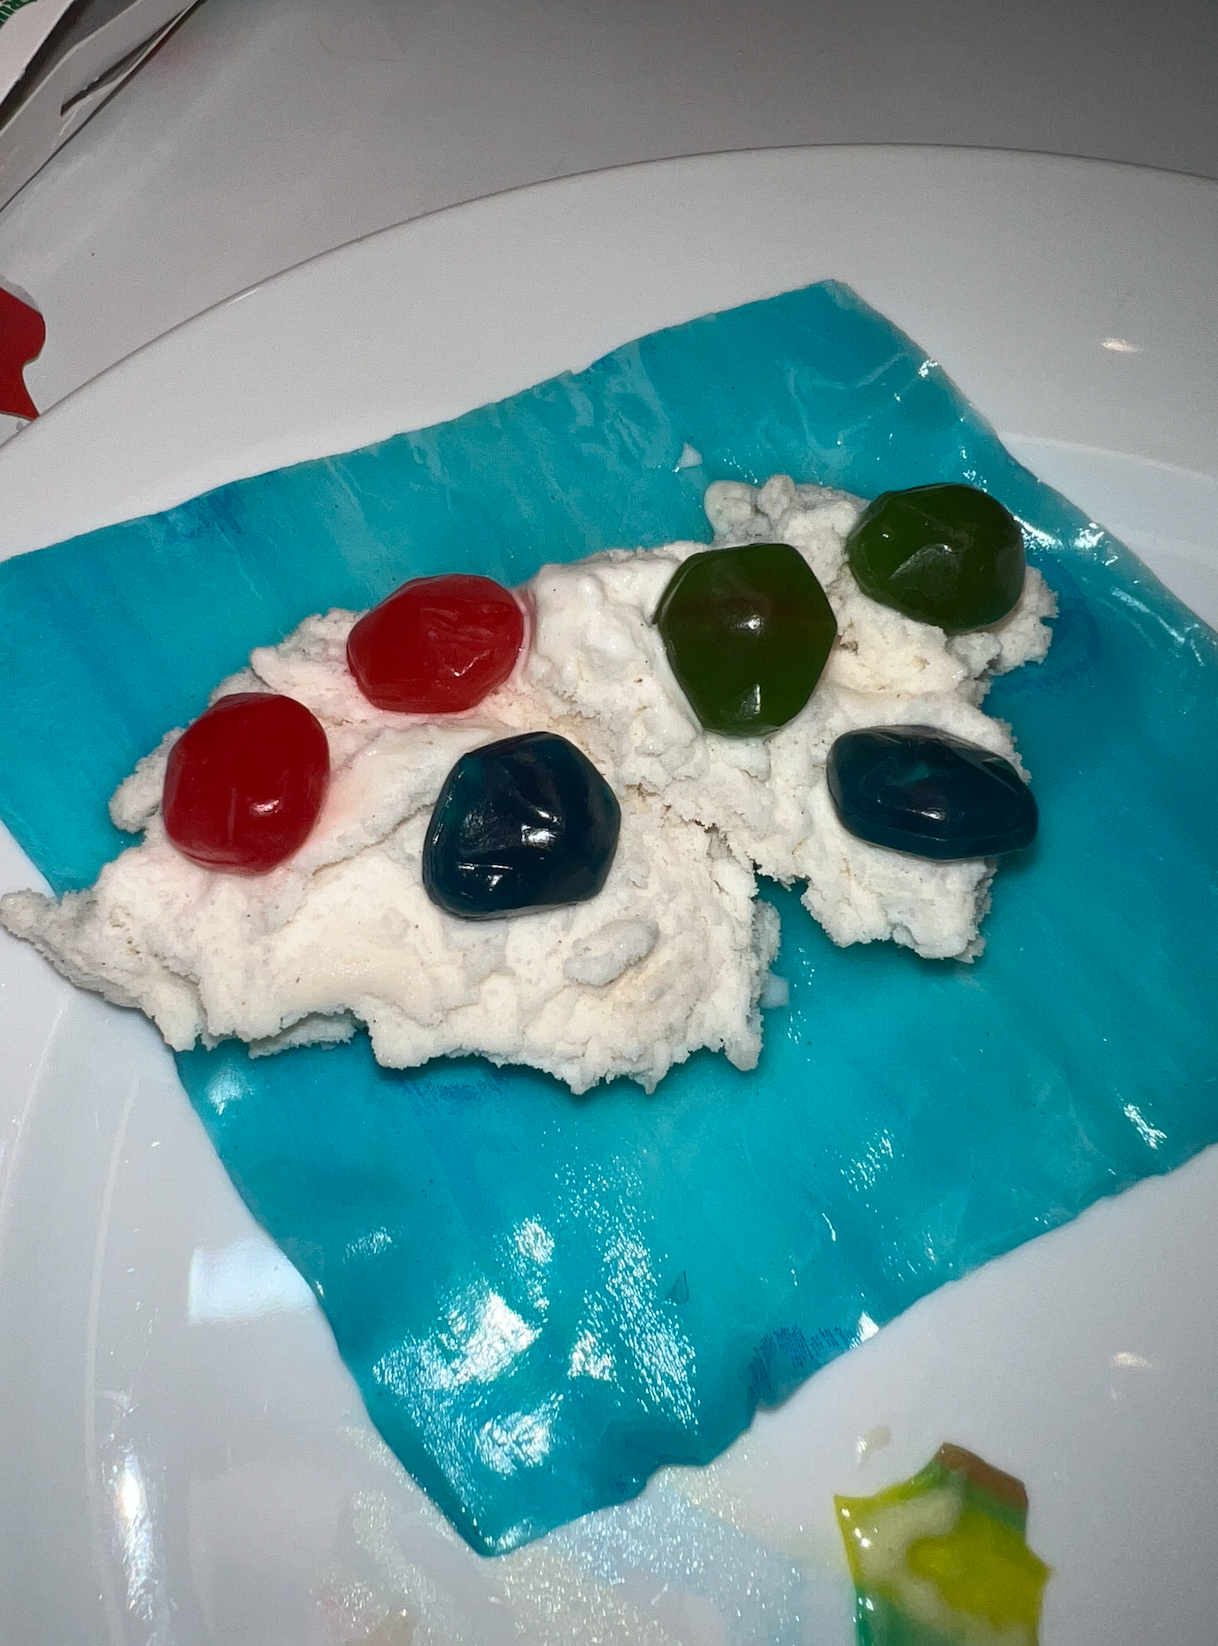 Gushers on top of the roll-up and ice cream